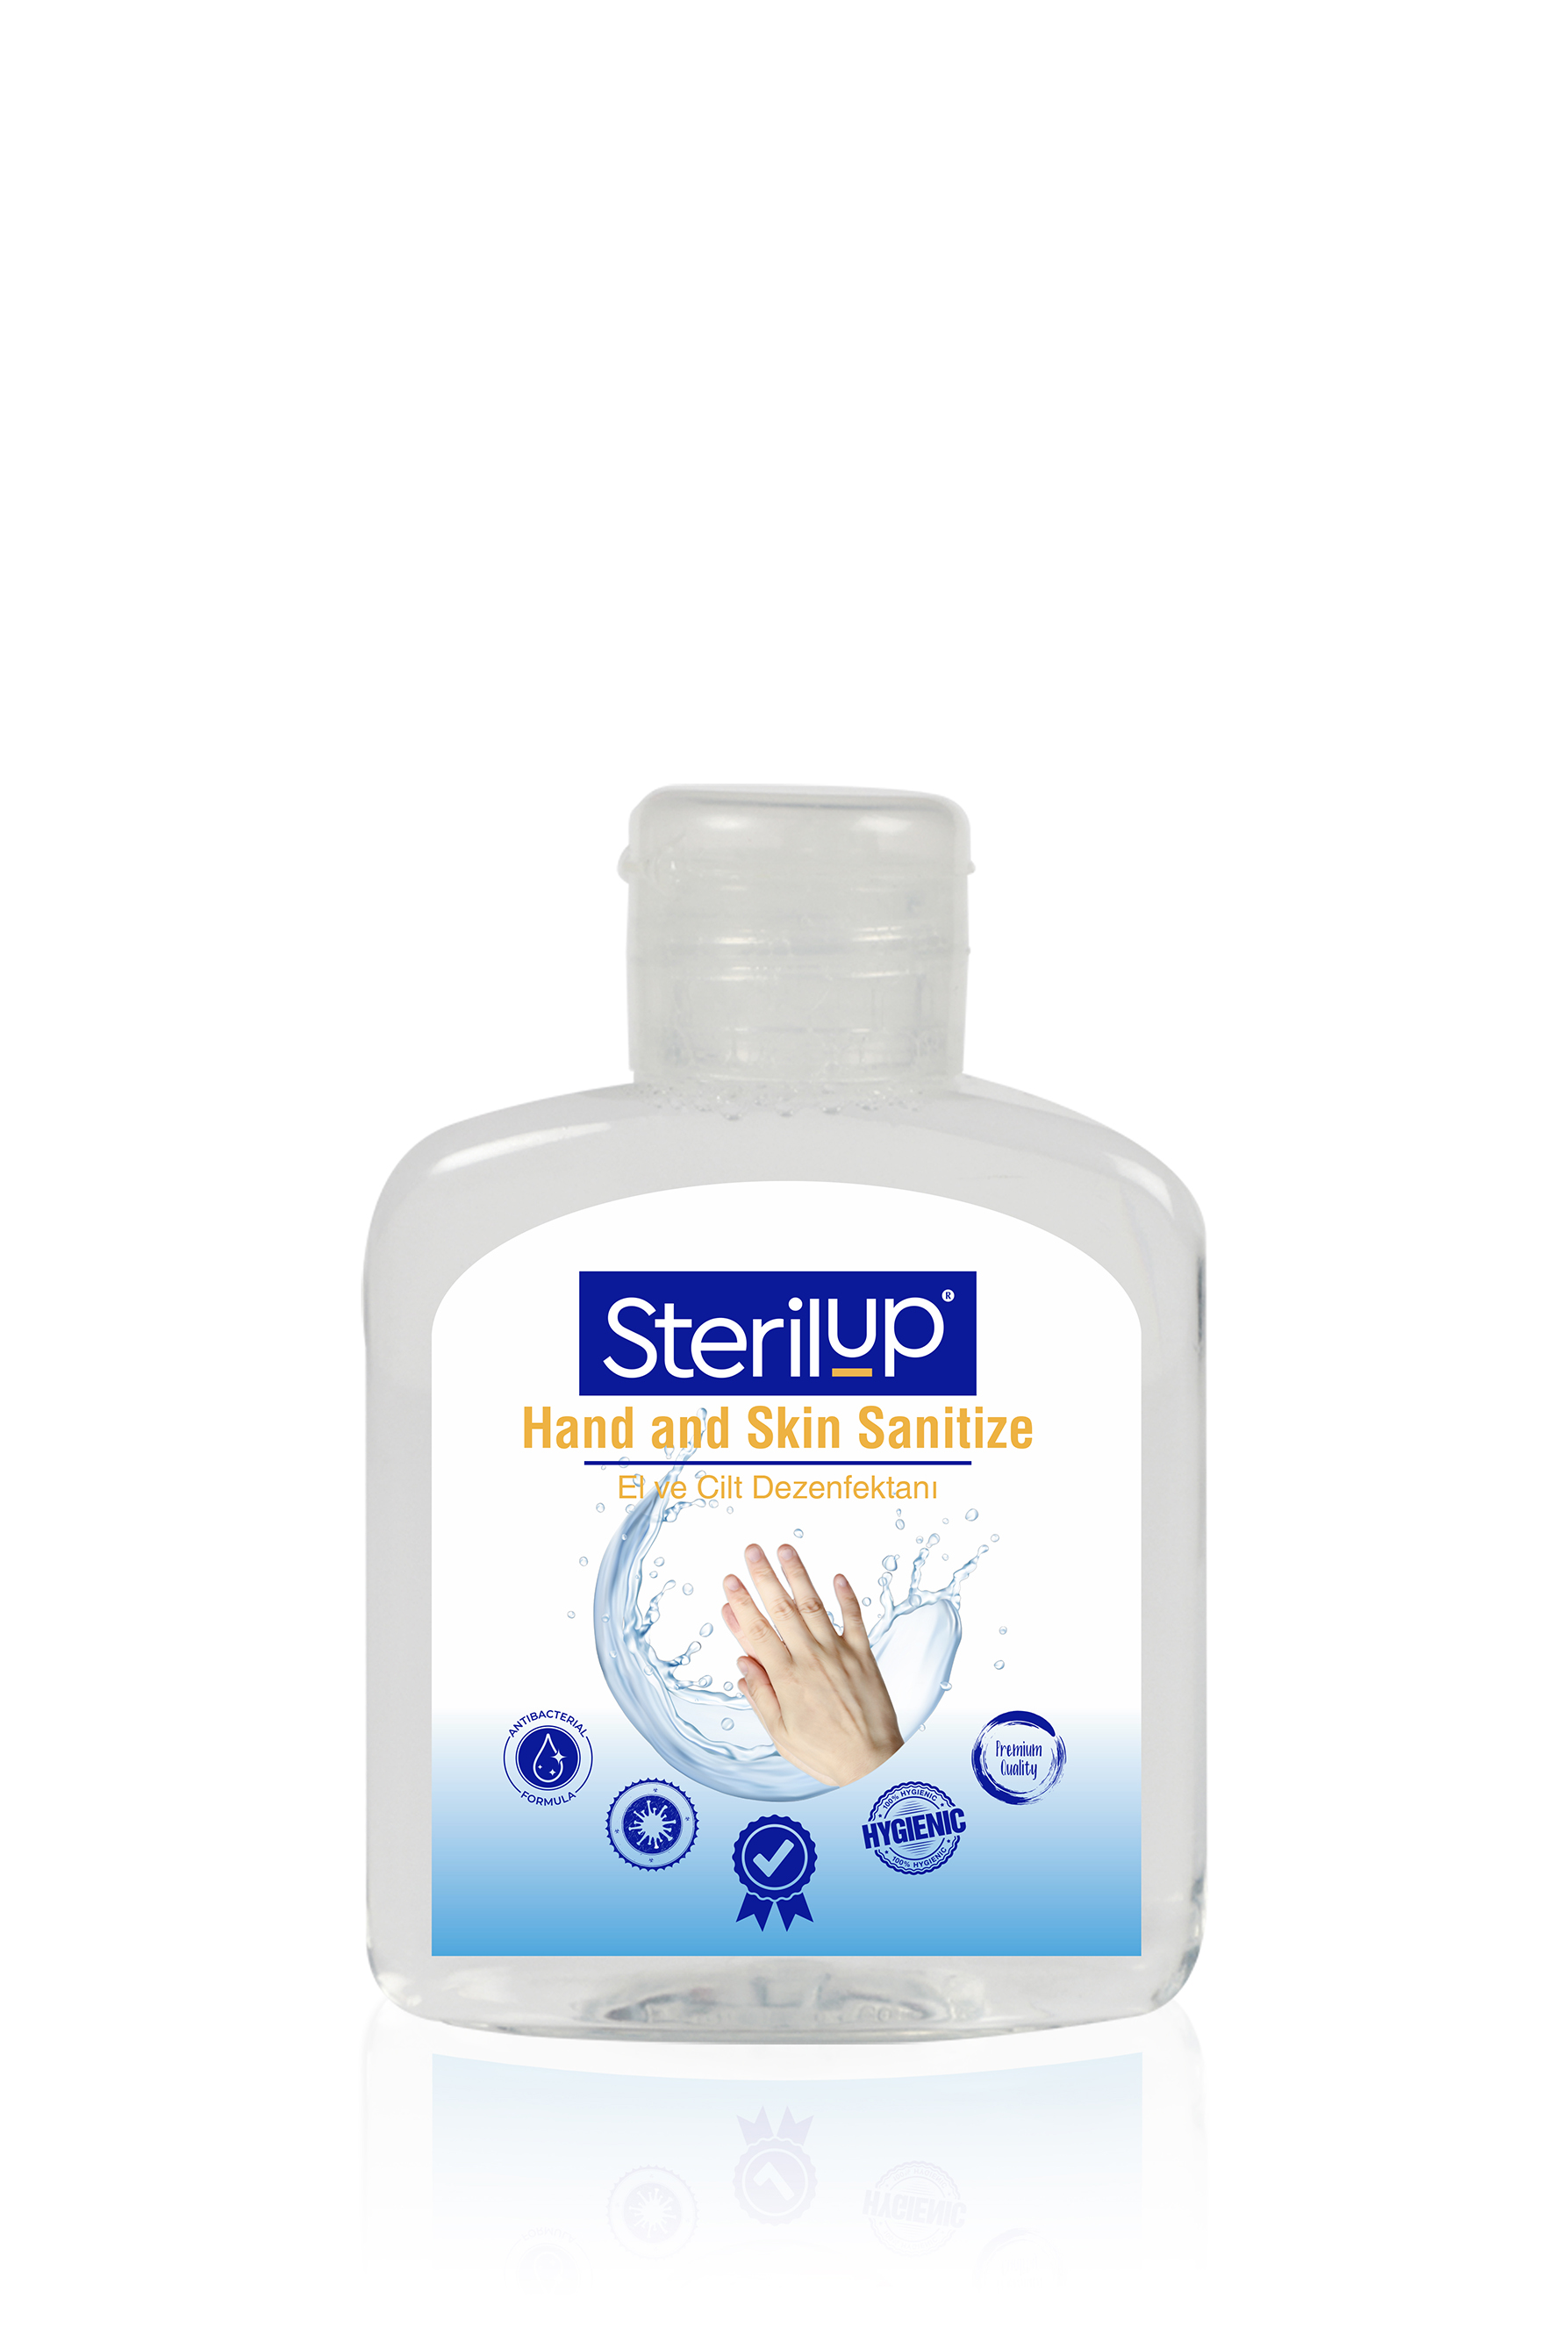 100 ml hand and skin disinfectant